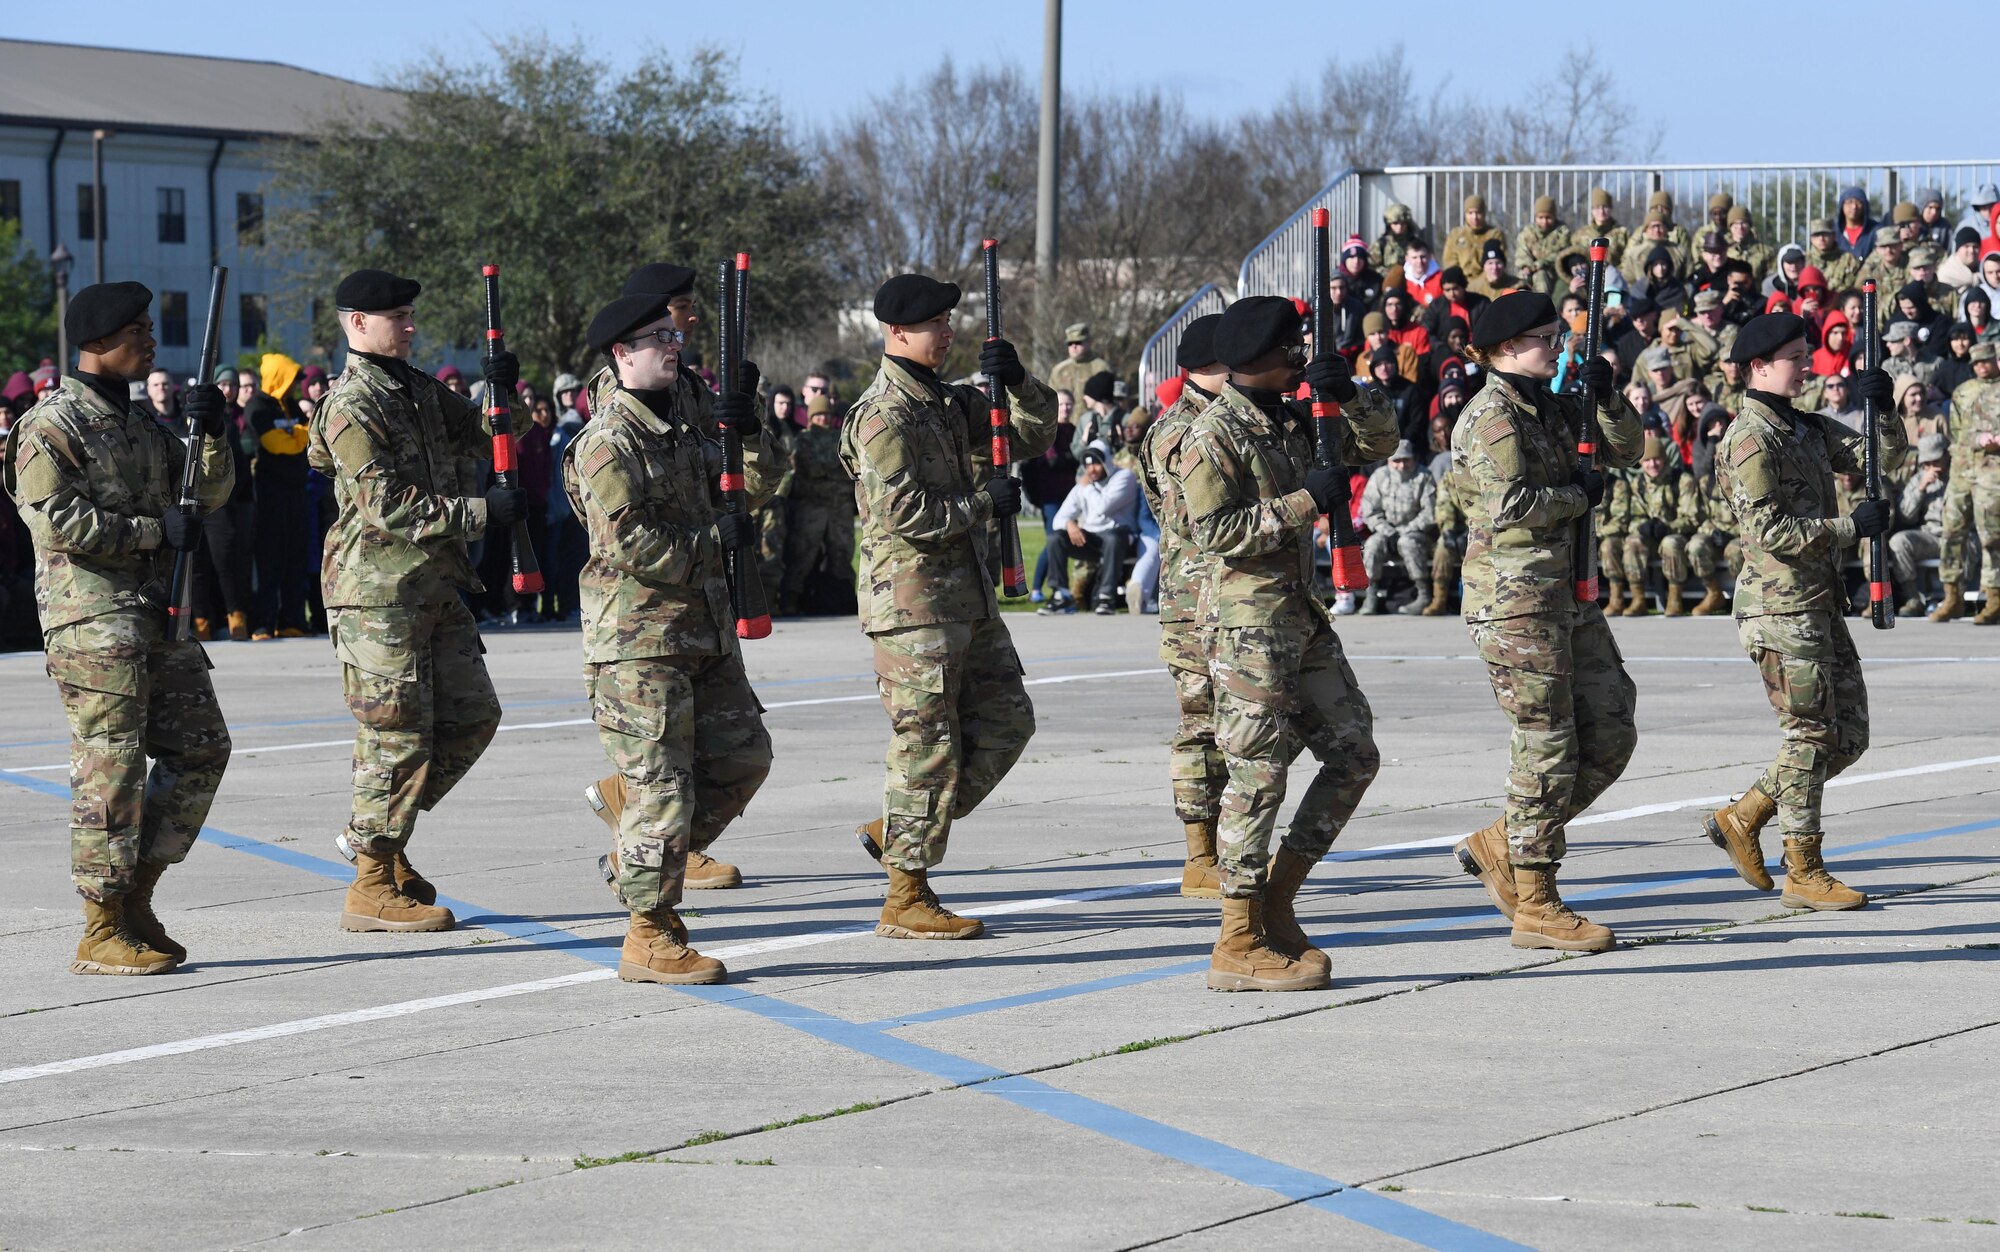 Members of the 336th Training Squadron freestyle drill team perform during the 81st Training Group drill down on the Levitow Training Support Facility drill pad at Keesler Air Force Base, Mississippi, Feb. 21, 2020. Airmen from the 81st TRG competed in a quarterly open ranks inspection, regulation drill routine and freestyle drill routine. Keesler trains more than 30,000 students each year. While in training, Airmen are given the opportunity to volunteer to learn and execute drill down routines. (U.S. Air Force photo by Kemberly Groue)